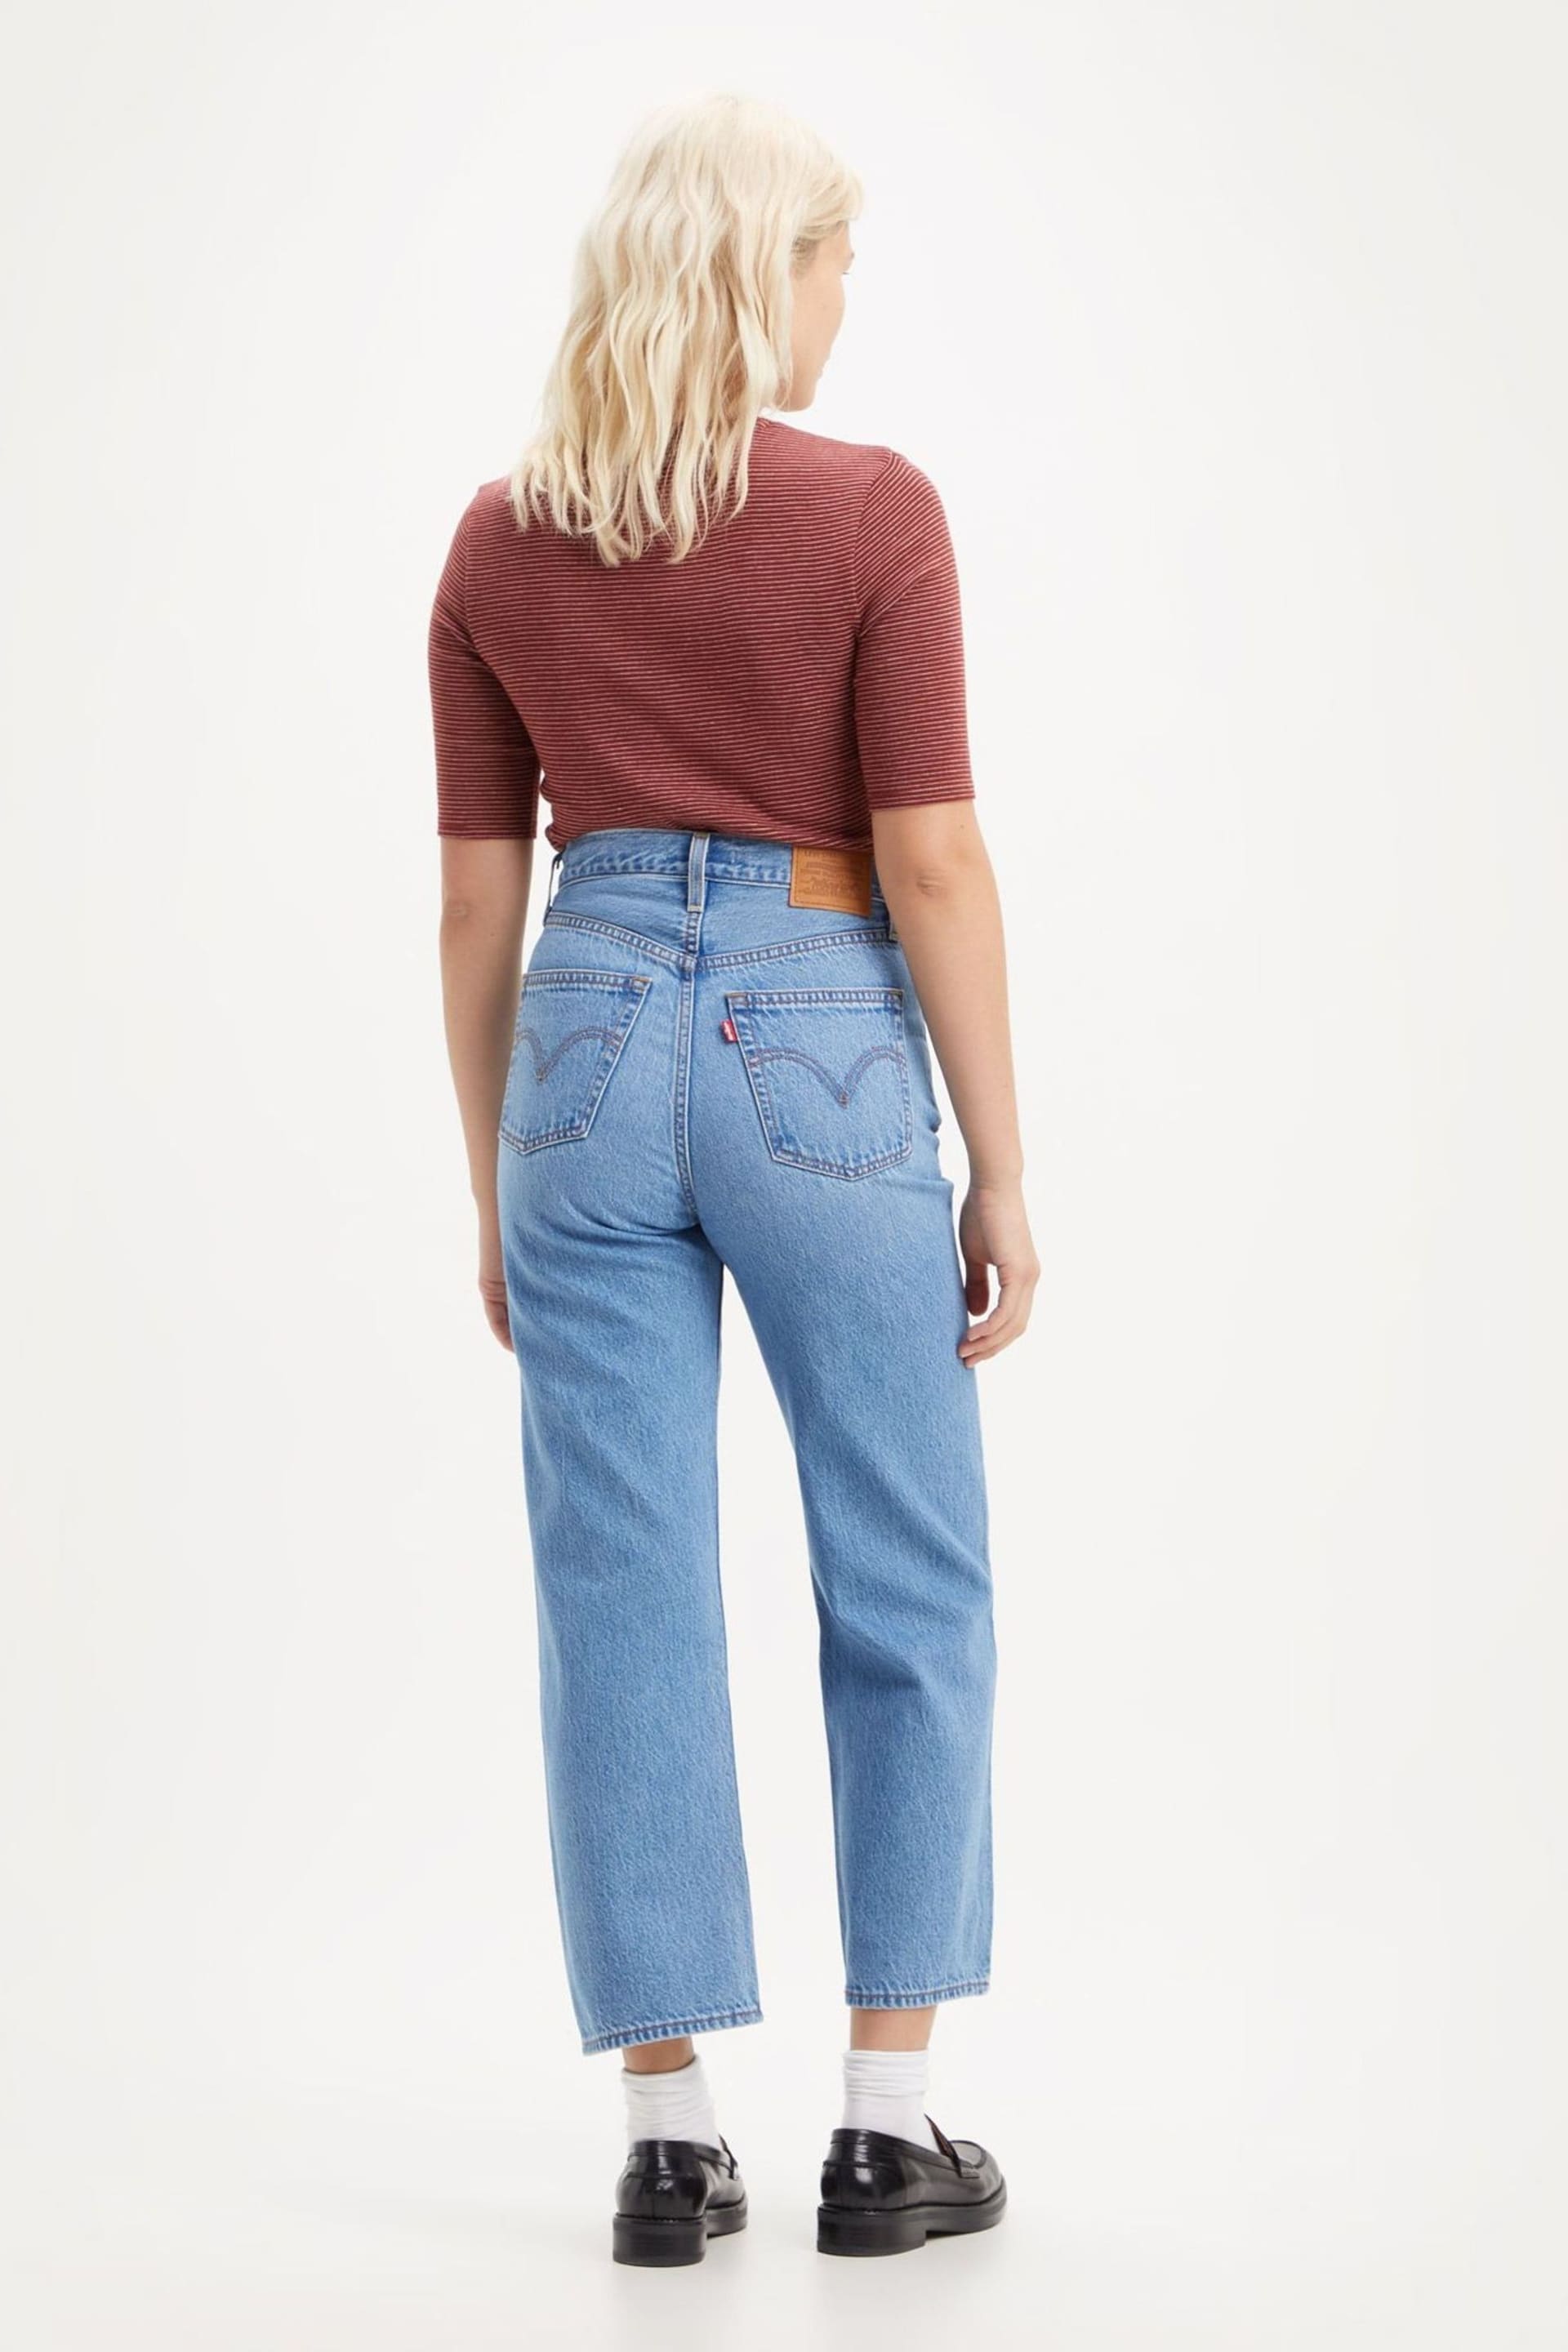 Levi's® In the Middle Ribcage Straight Ankle Jeans - Image 3 of 14